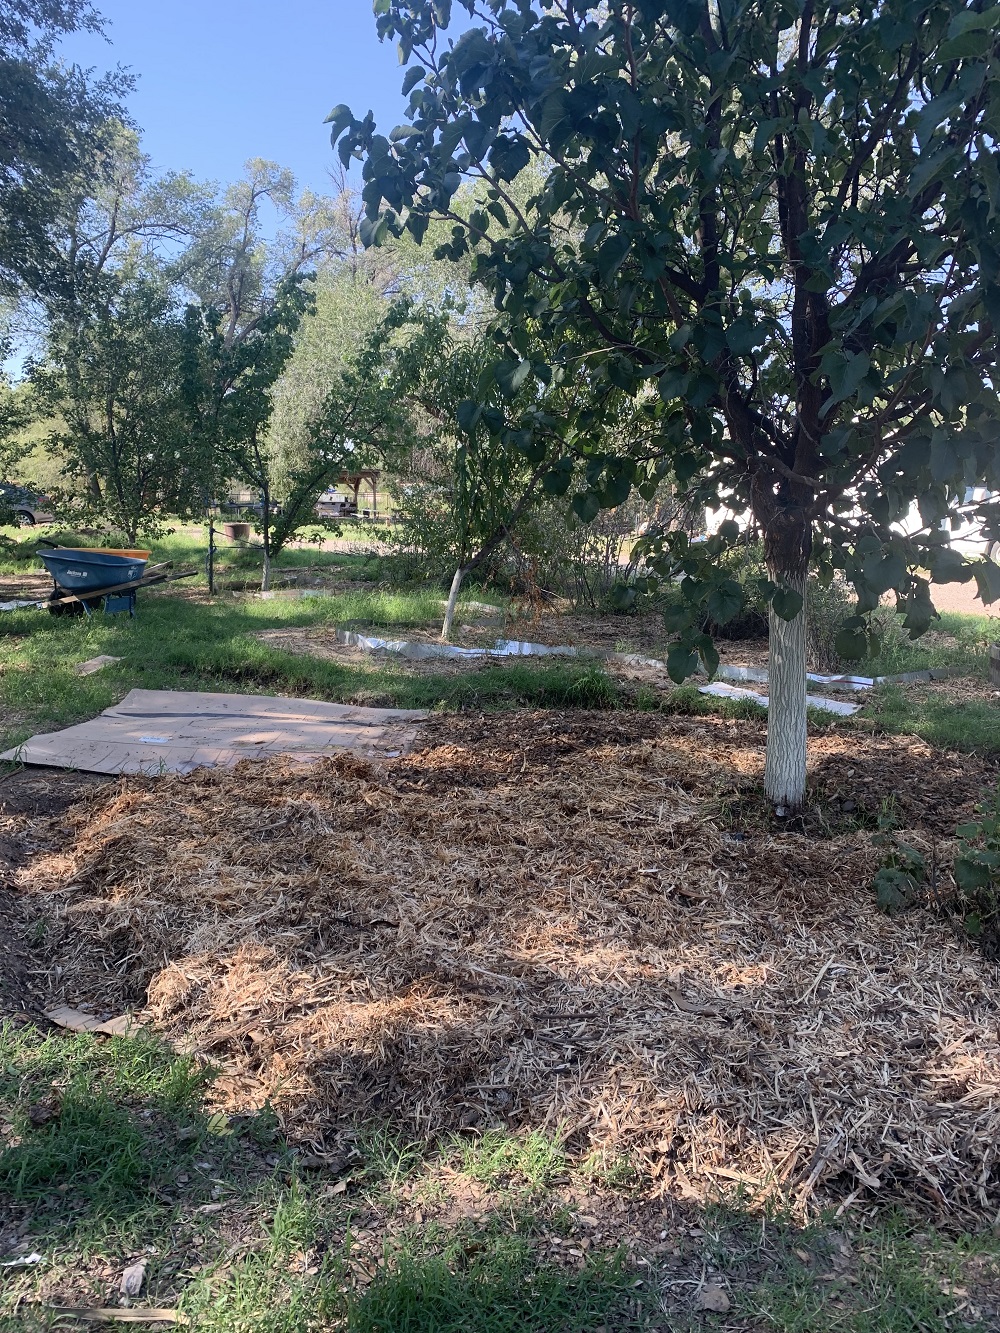 A large amount of tan and brown mulch is on the ground under a shady grove of trees.